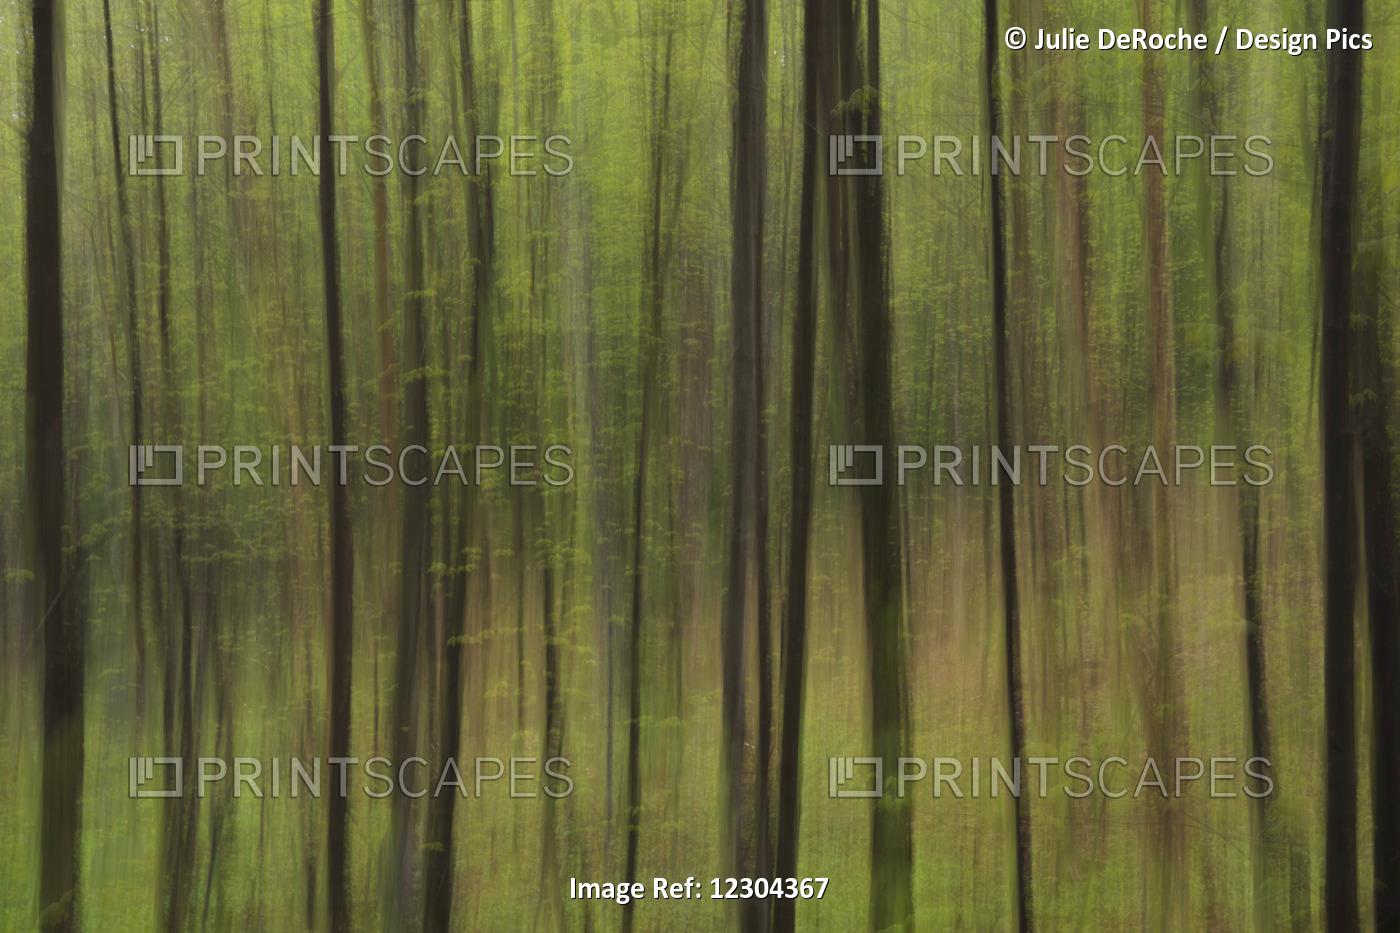 Abstract Of A Forest With Green Tree Trunks; Ontario, Canada